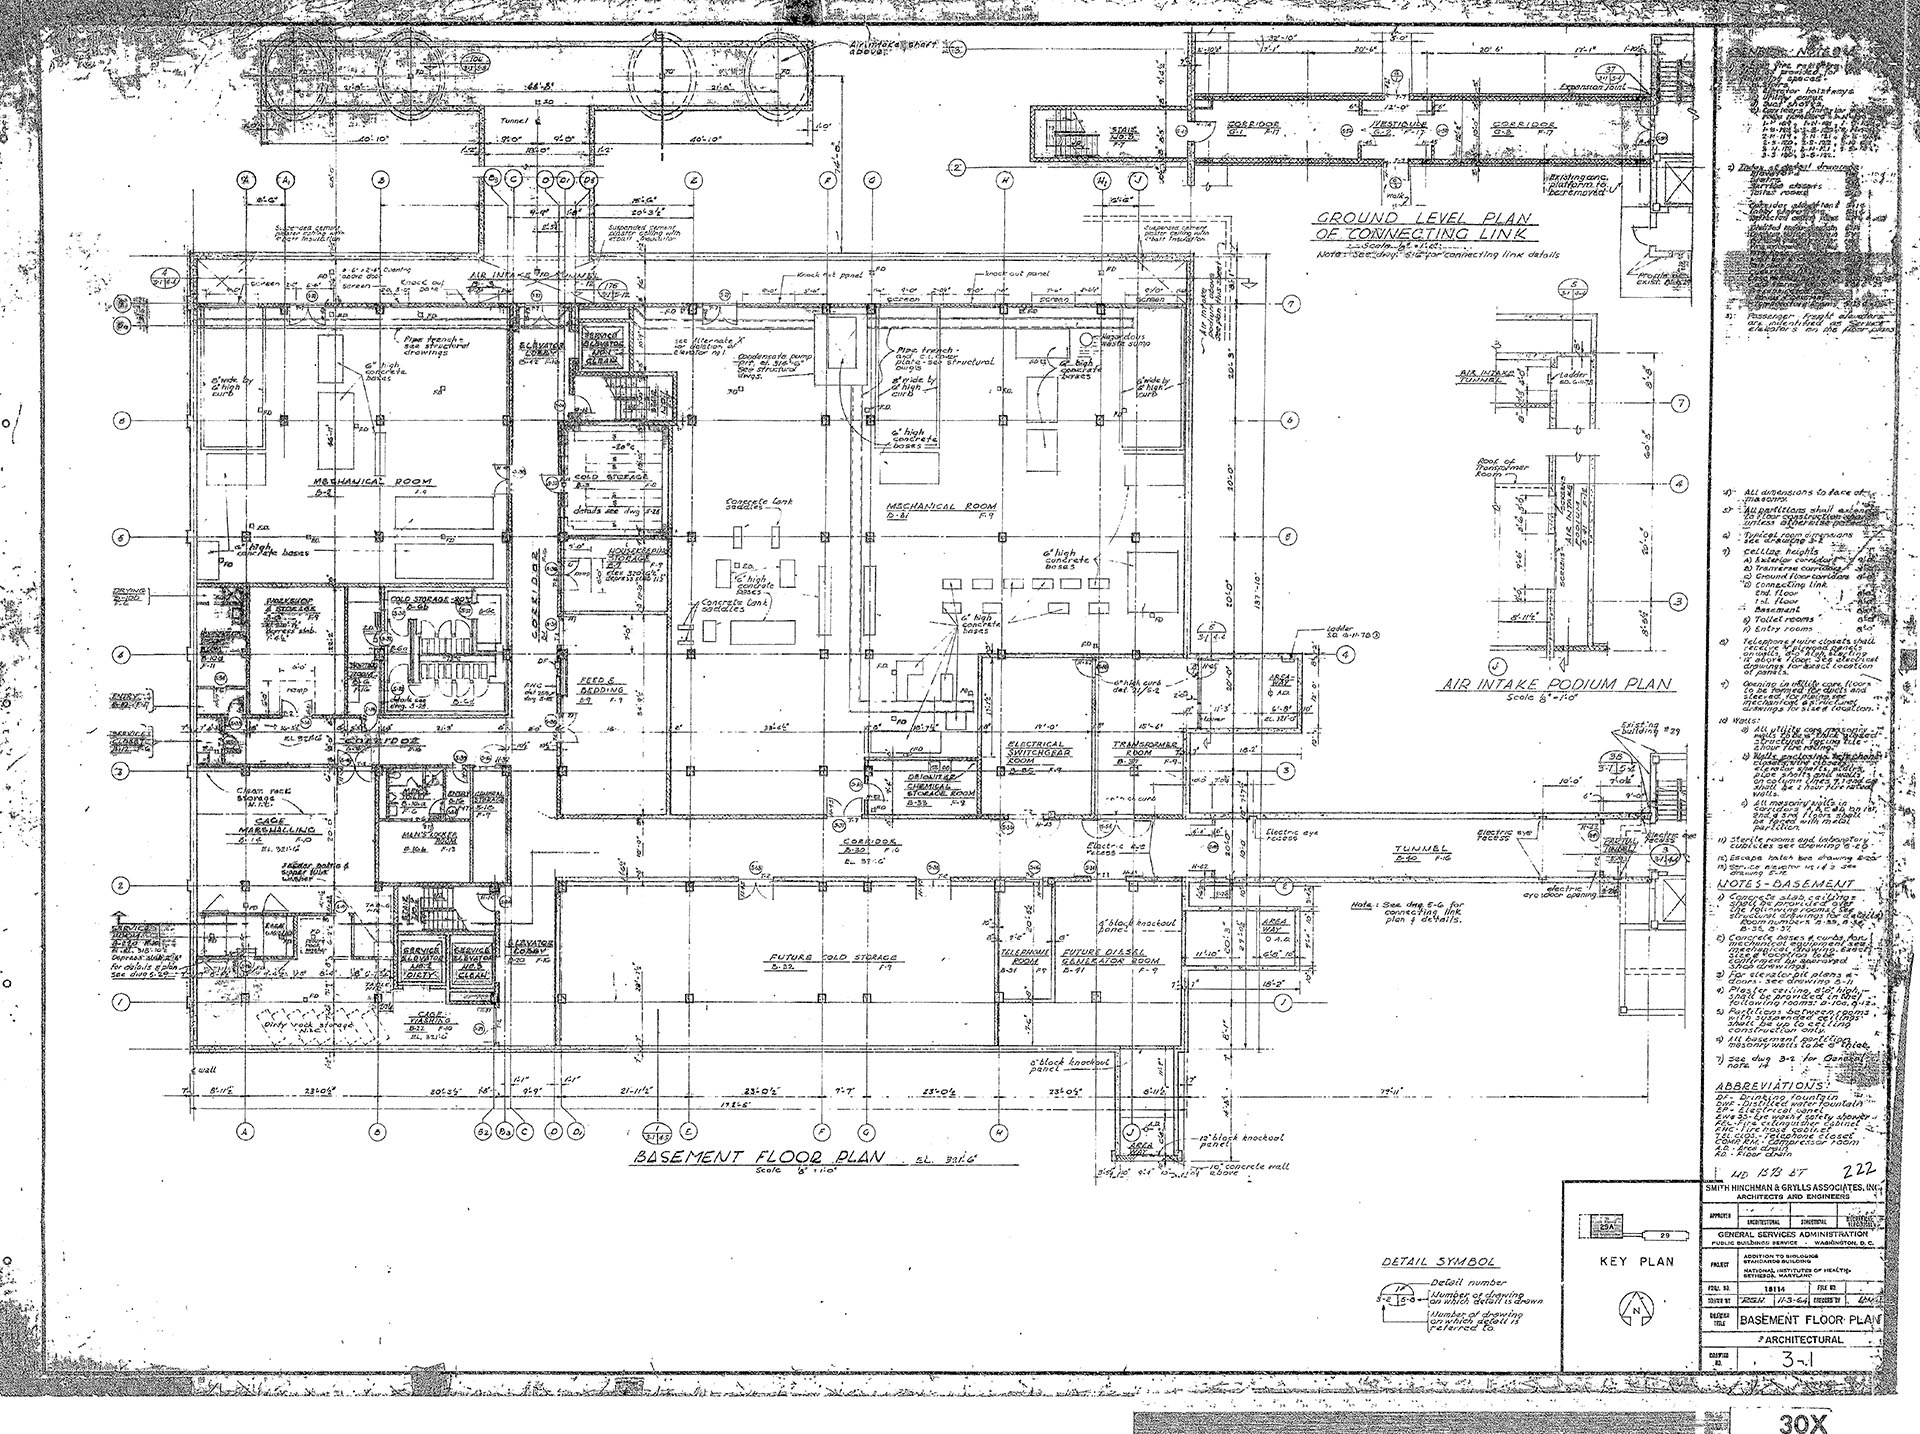 Basement floor plan of Building 29A, showing the connection to the basement of Building 29 to the east.